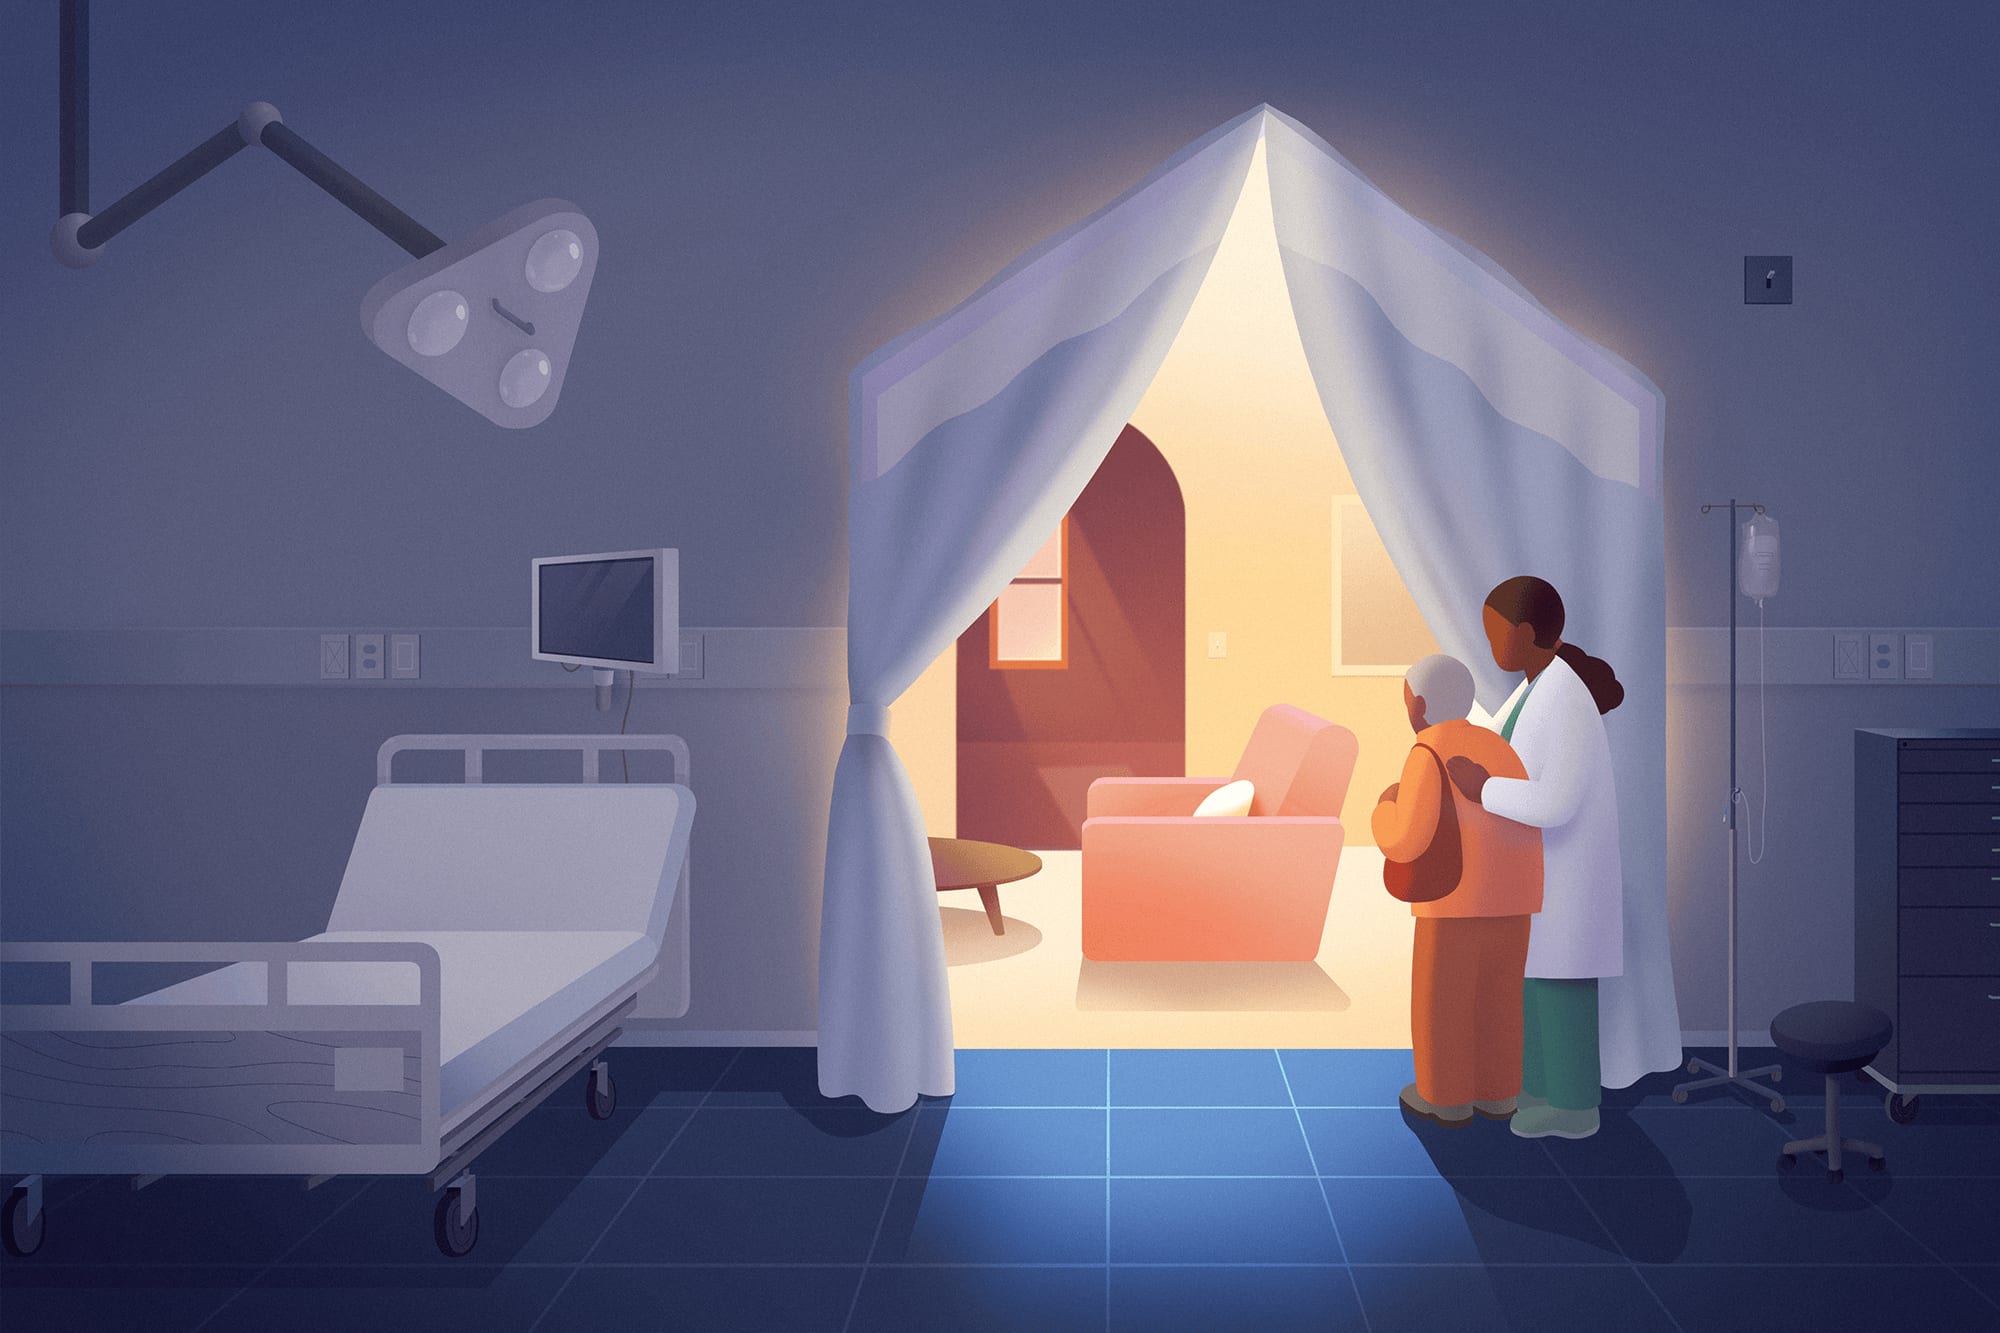 Illustration concept of physician with elderly woman set in a hospital room opening up to a living room scene.